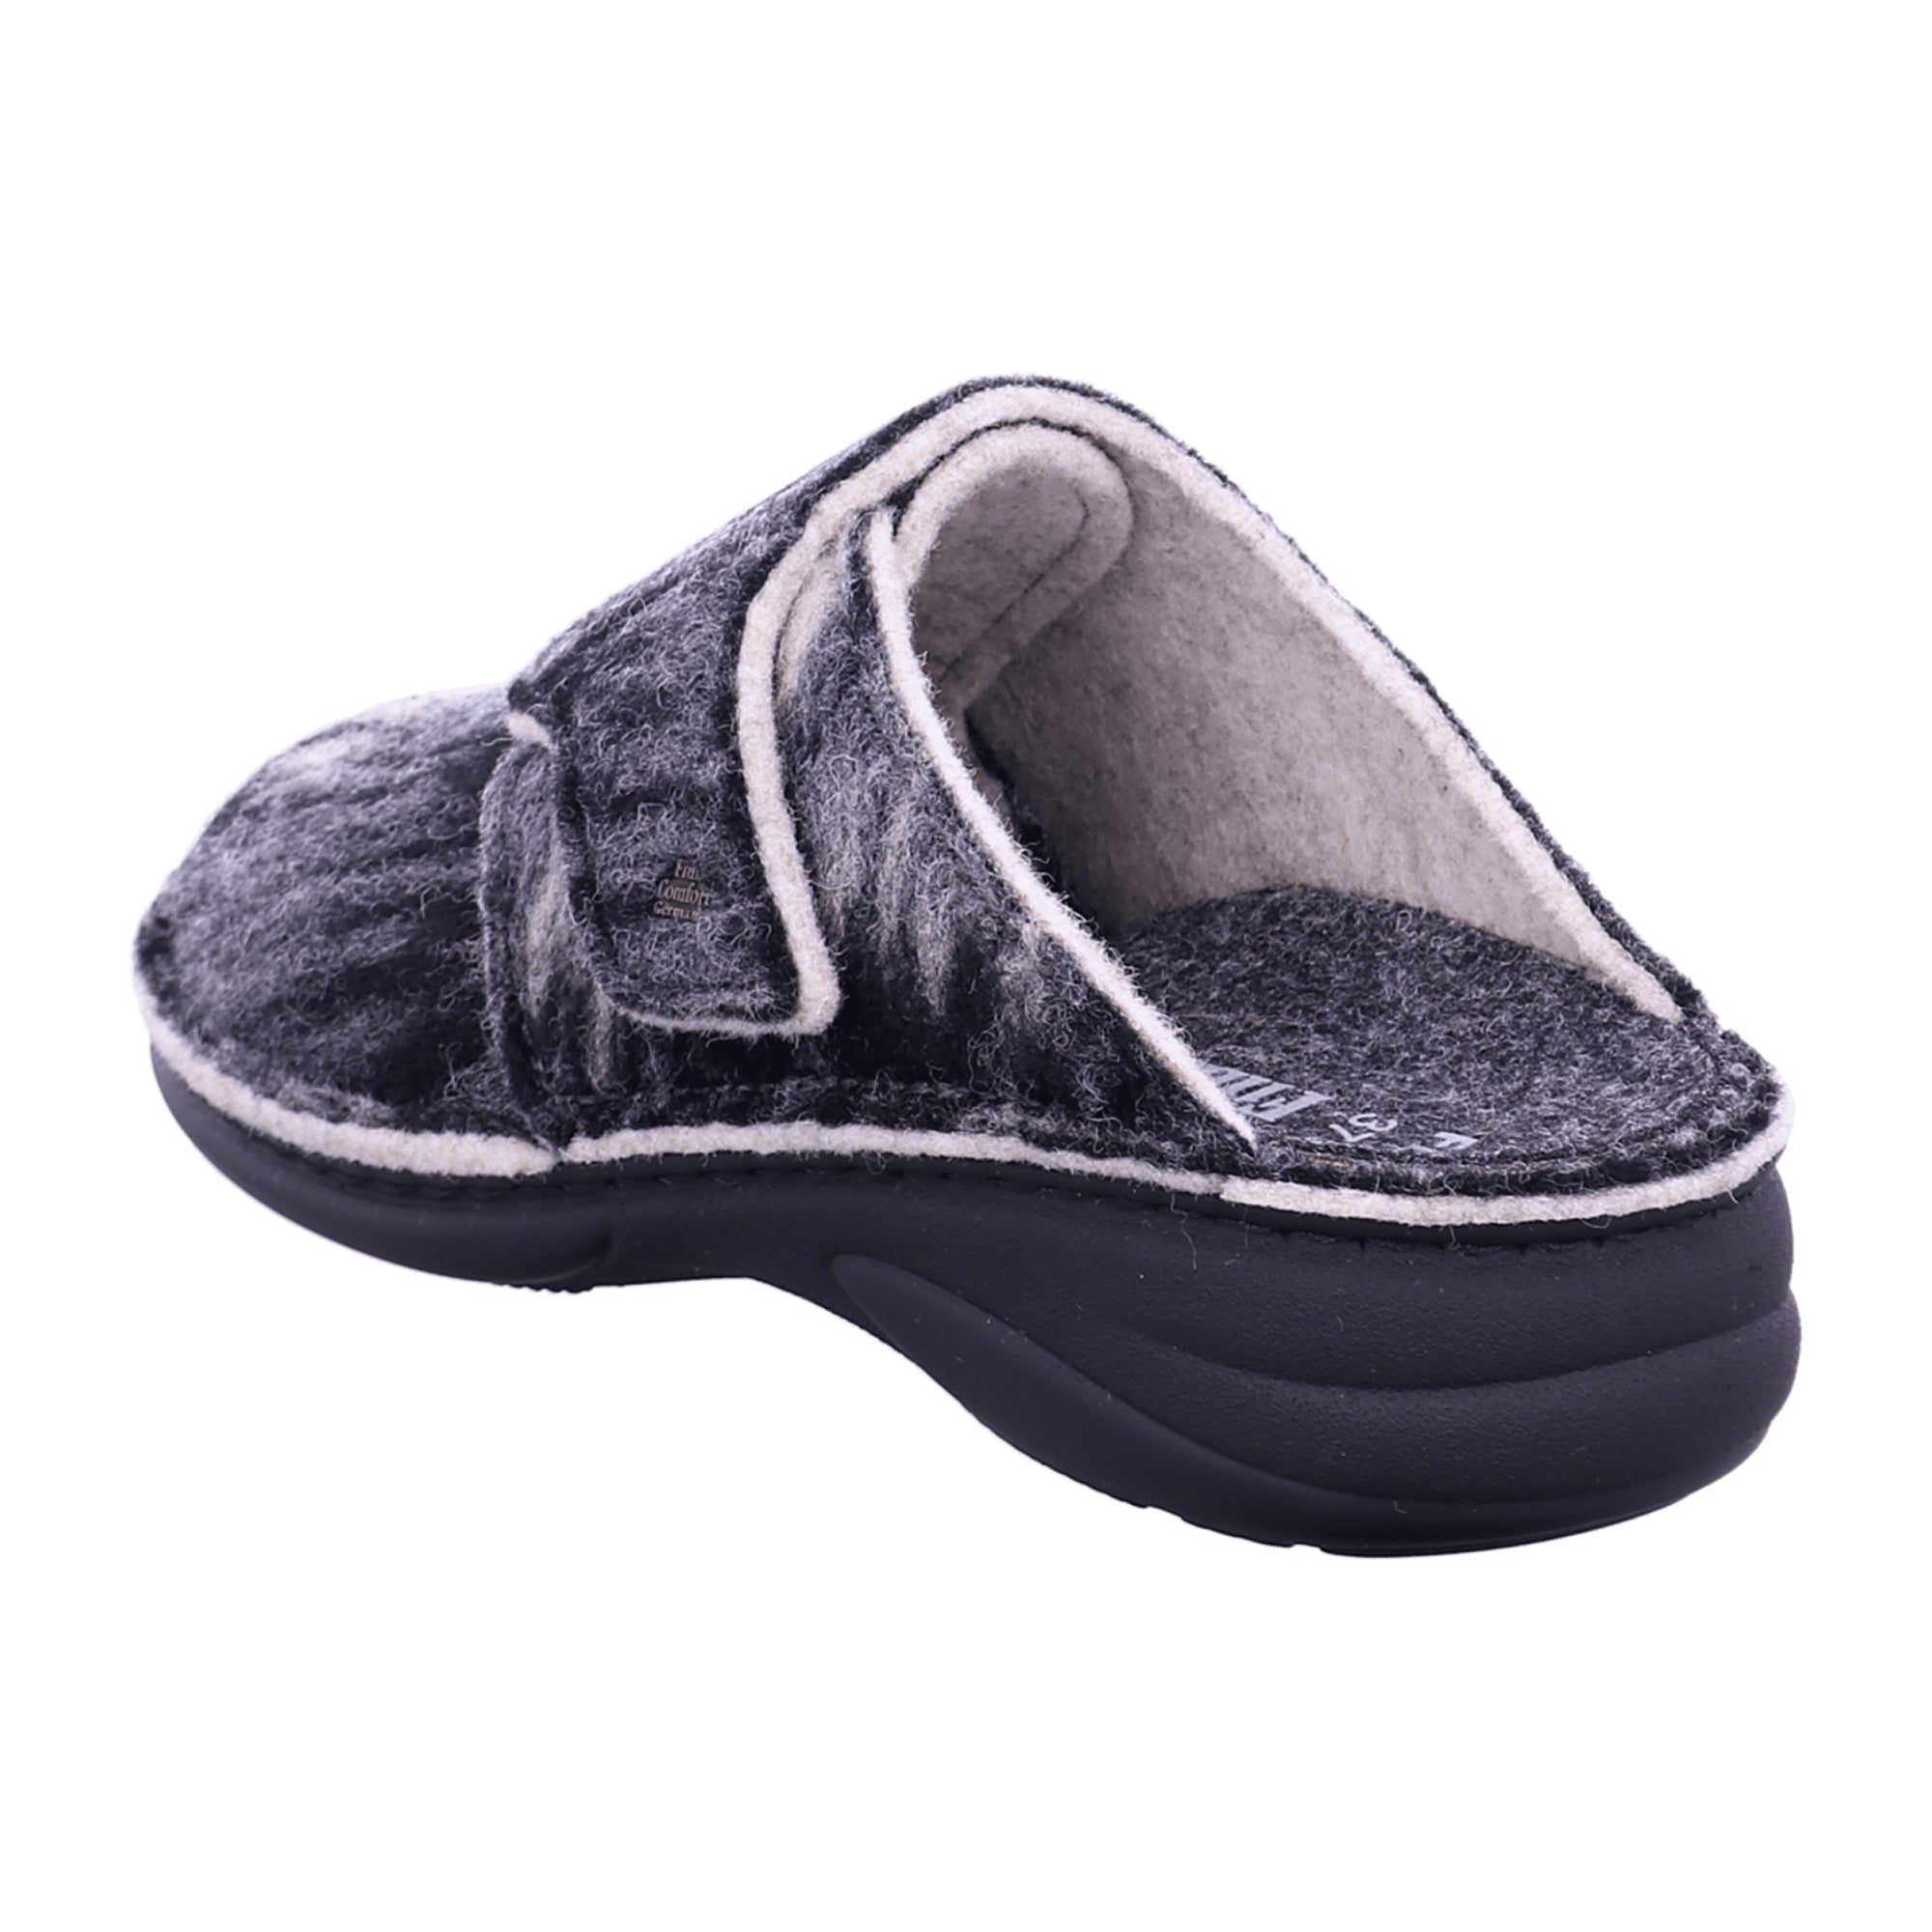 Finn Comfort GOMS Women's Comfort Shoes, Stylish Grey - Perfect for Everyday Wear